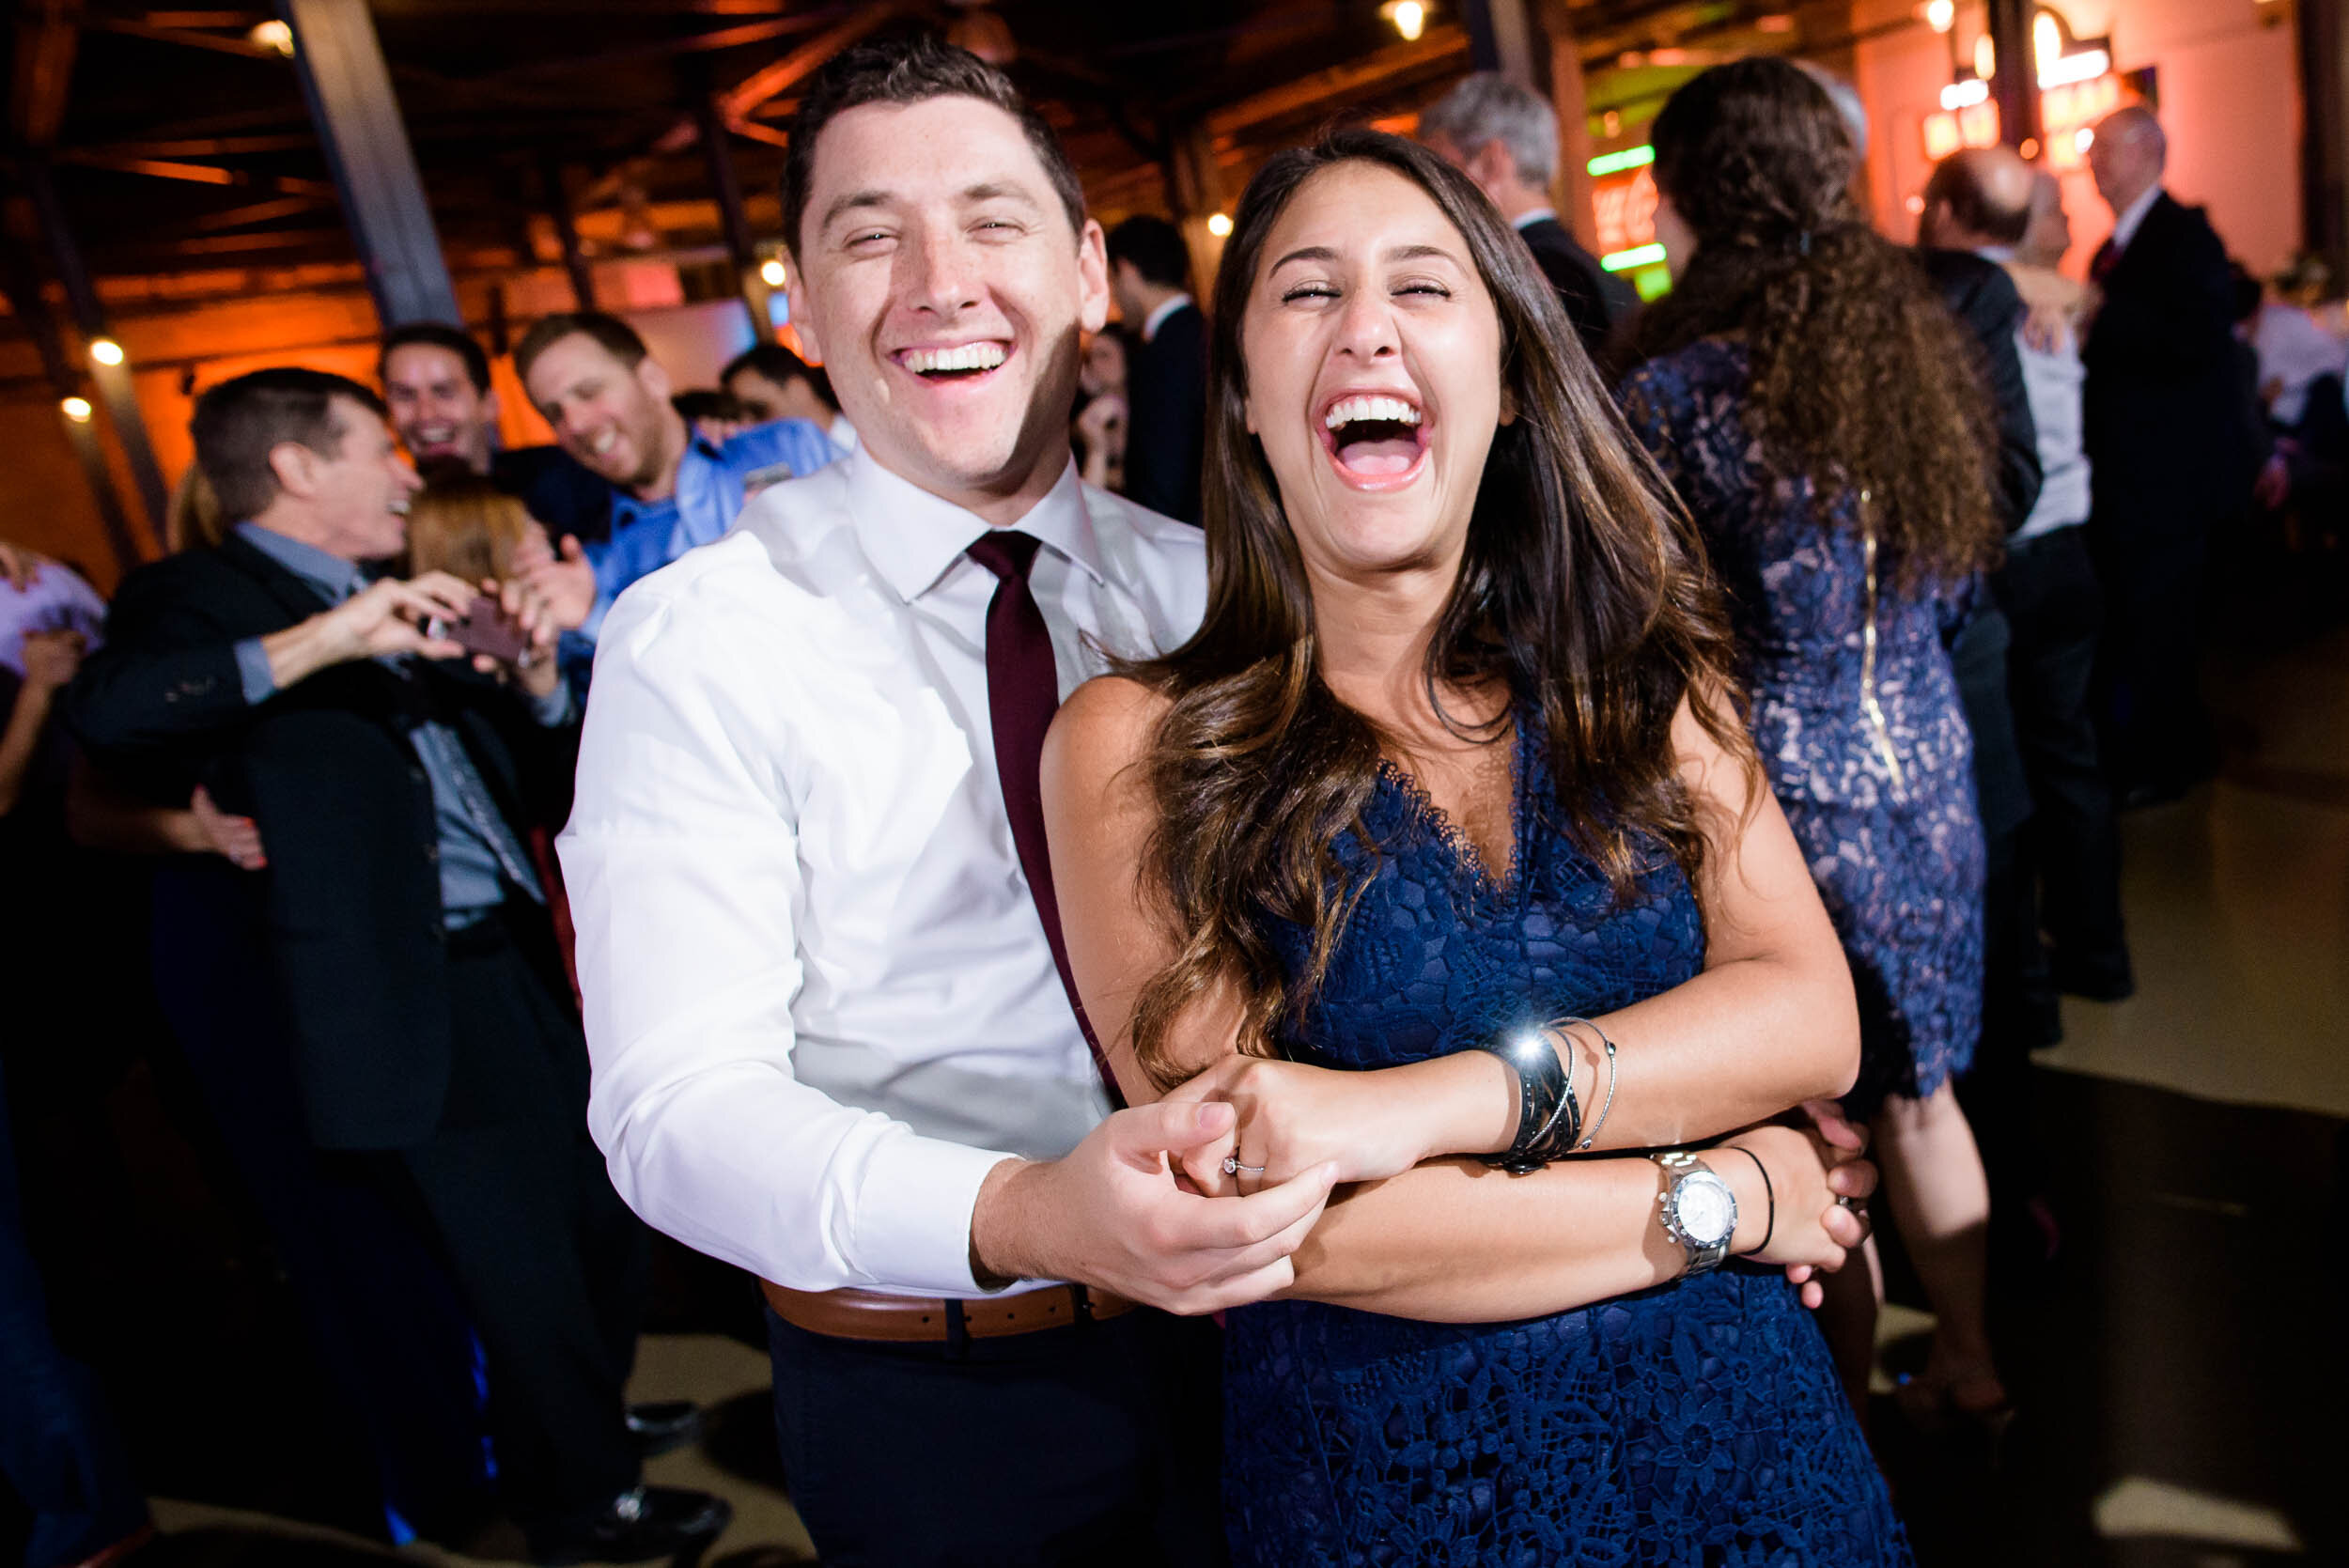 Fun dance floor moment photo: Ravenswood Event Center Chicago wedding captured by J. Brown Photography.  